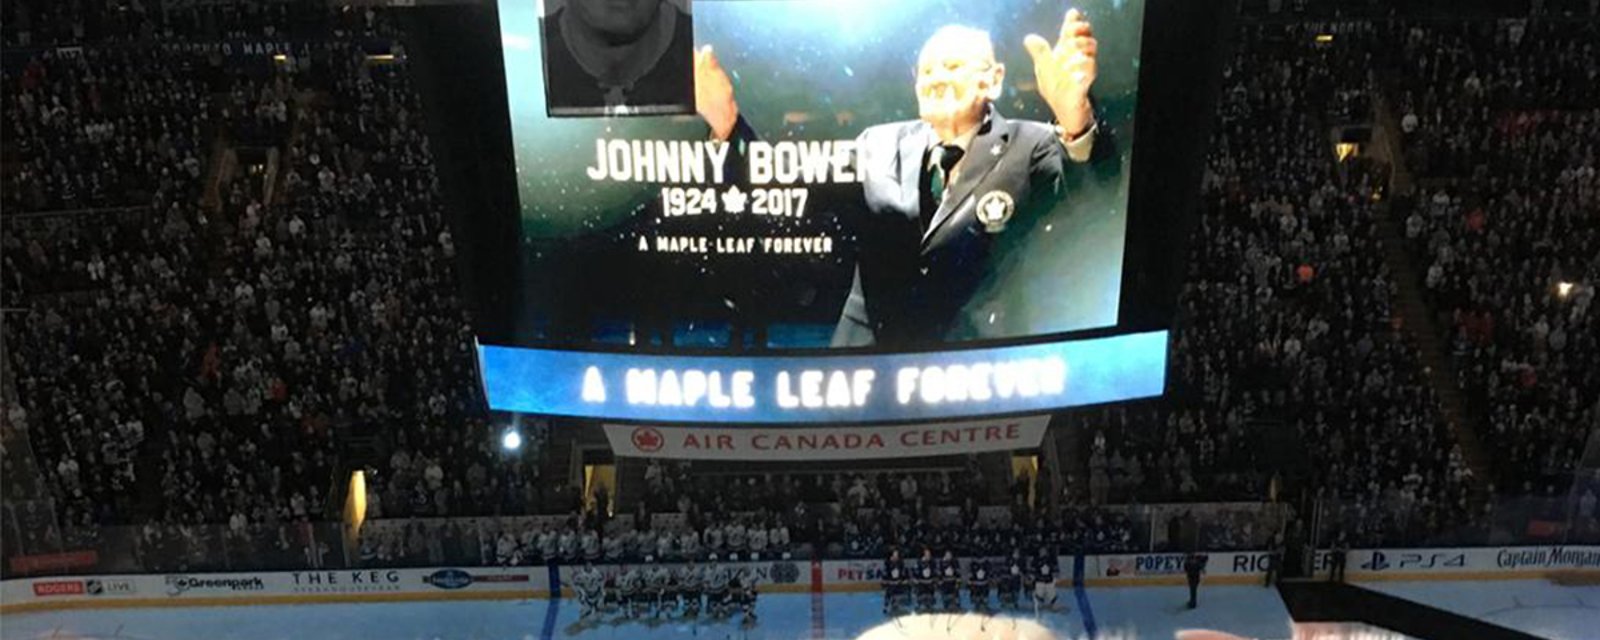 Must See: Leafs pay respect to Johnny Bower with emotional tribute